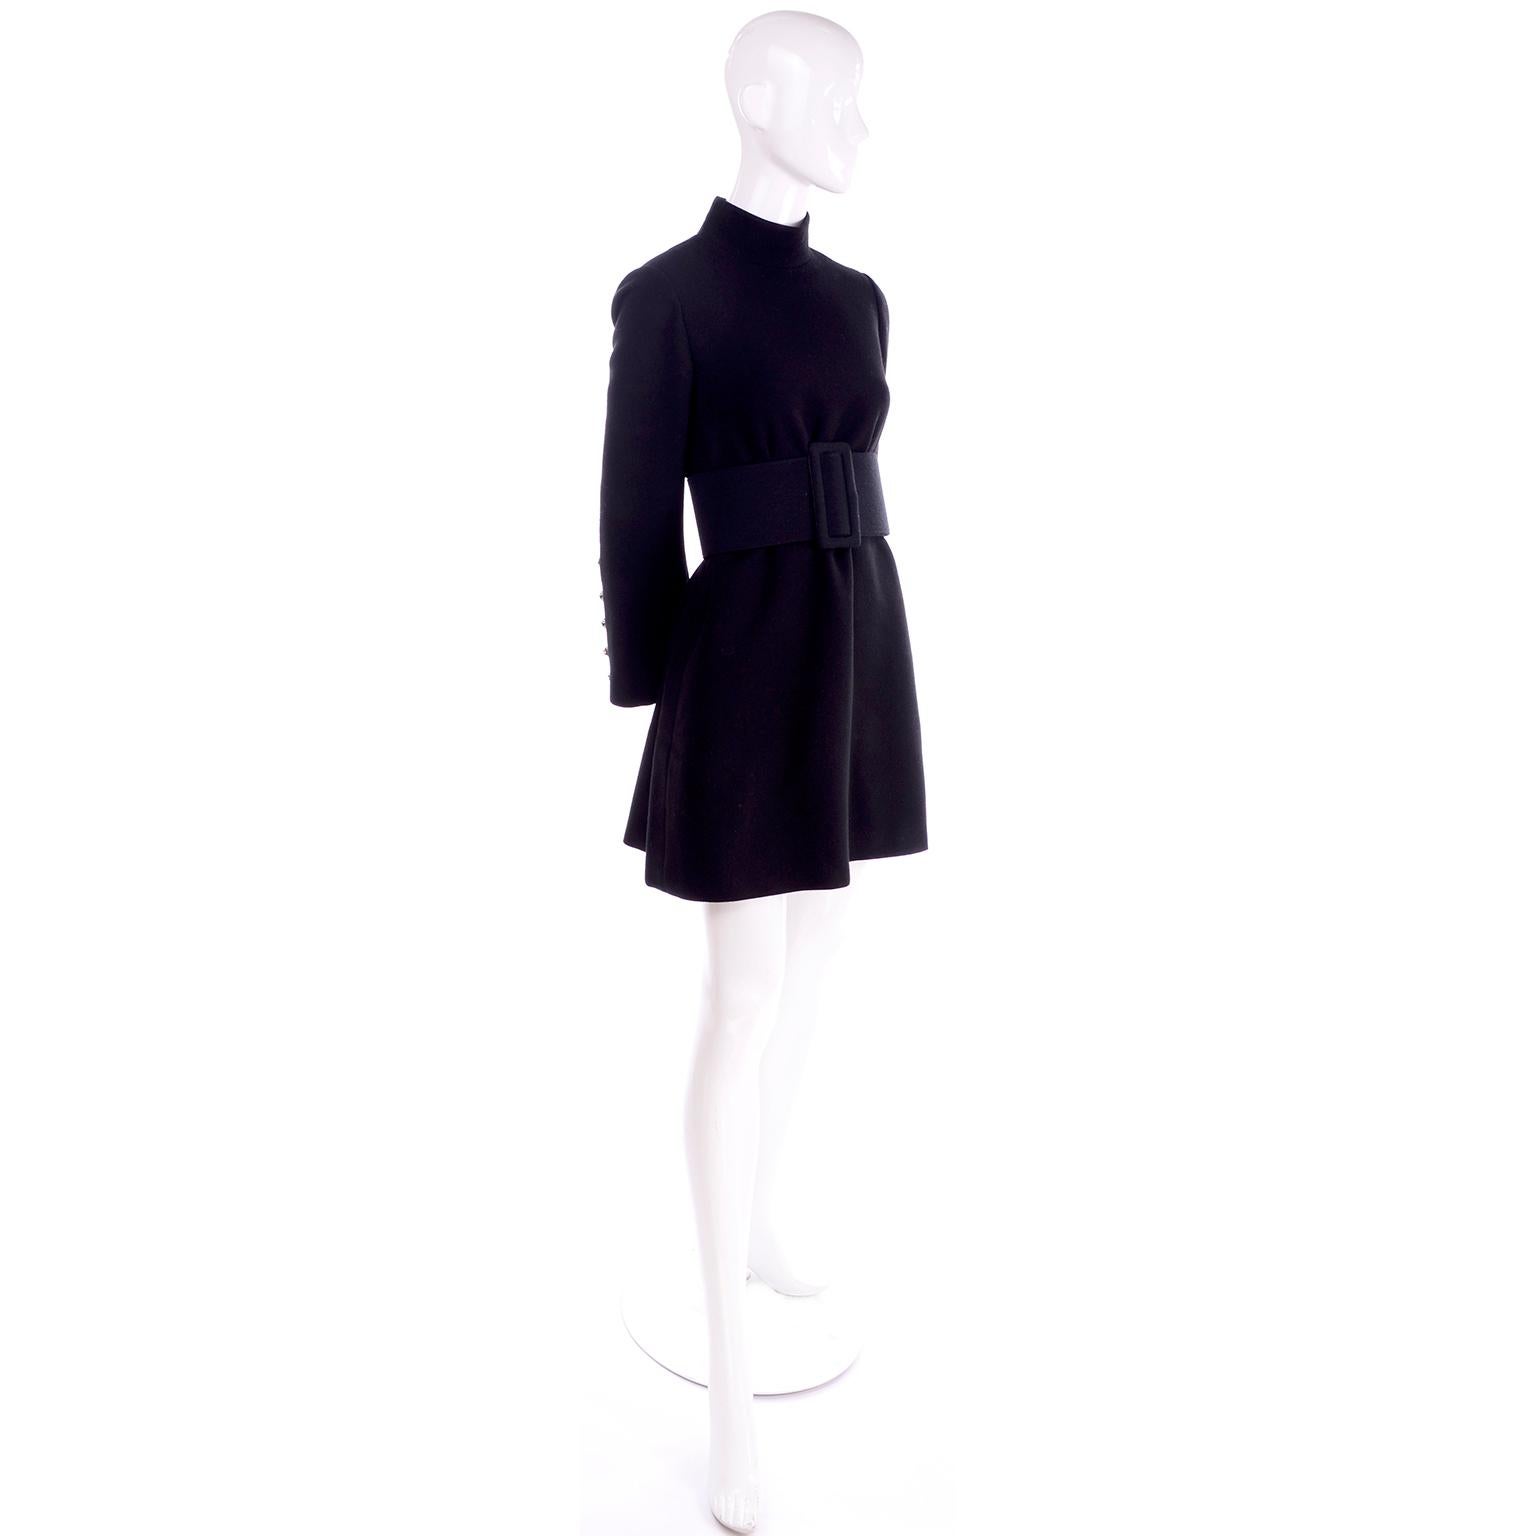 We love Geoffrey Beene and this is an iconic Geoffrey beene dress from the 1960's. This black wool mini dress has an oversized matching black thick belt. This dress fits like a 4/6 in a tent or swing style and can be worn with or without the belt. .